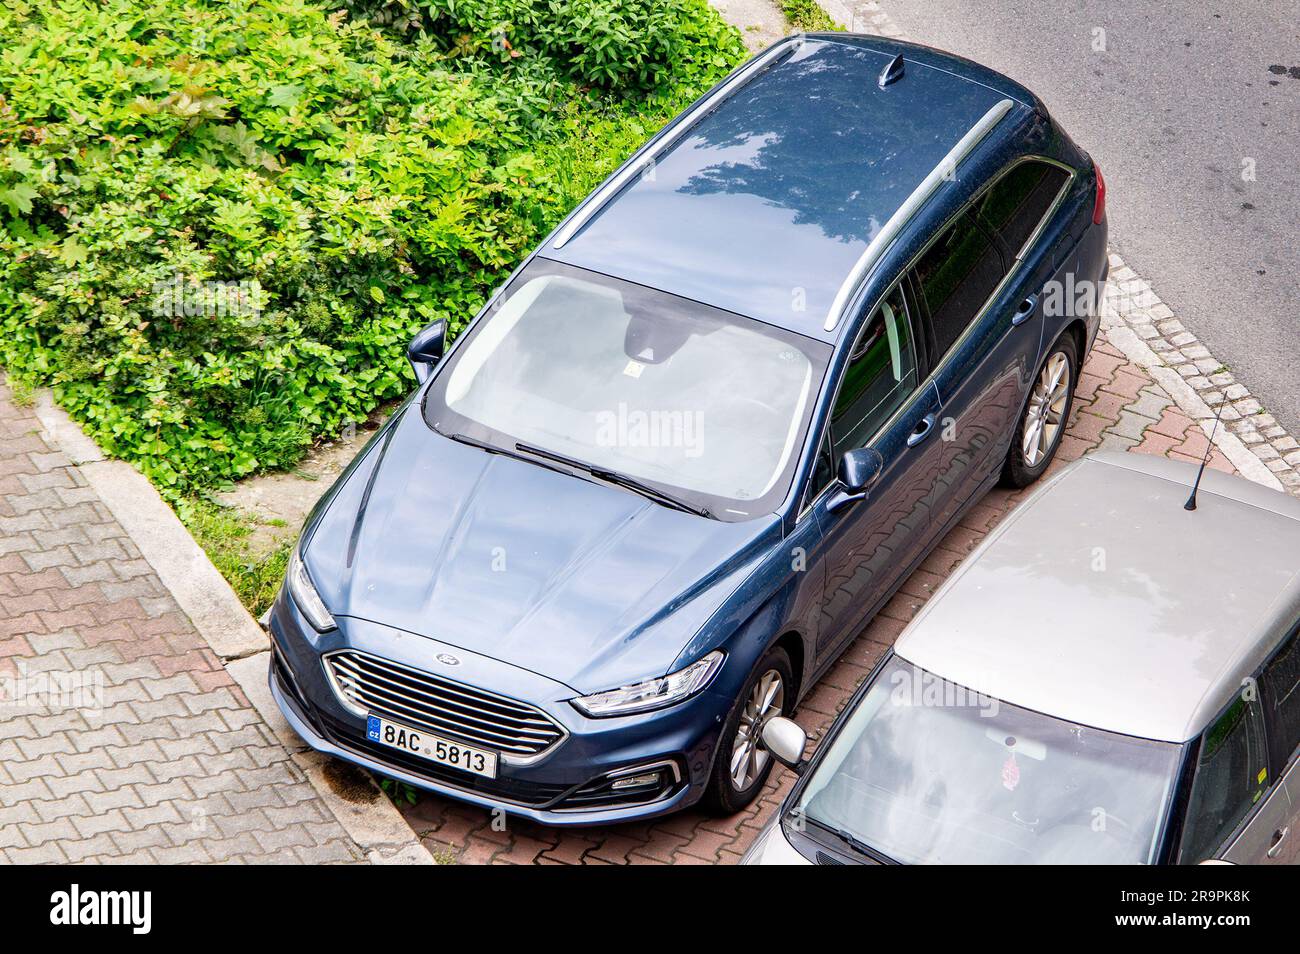 OSTRAVA, CZECH REPUBLIC - MAY 23, 2023: Last generation of Ford Mondeo Combi Turnier car parked Stock Photo